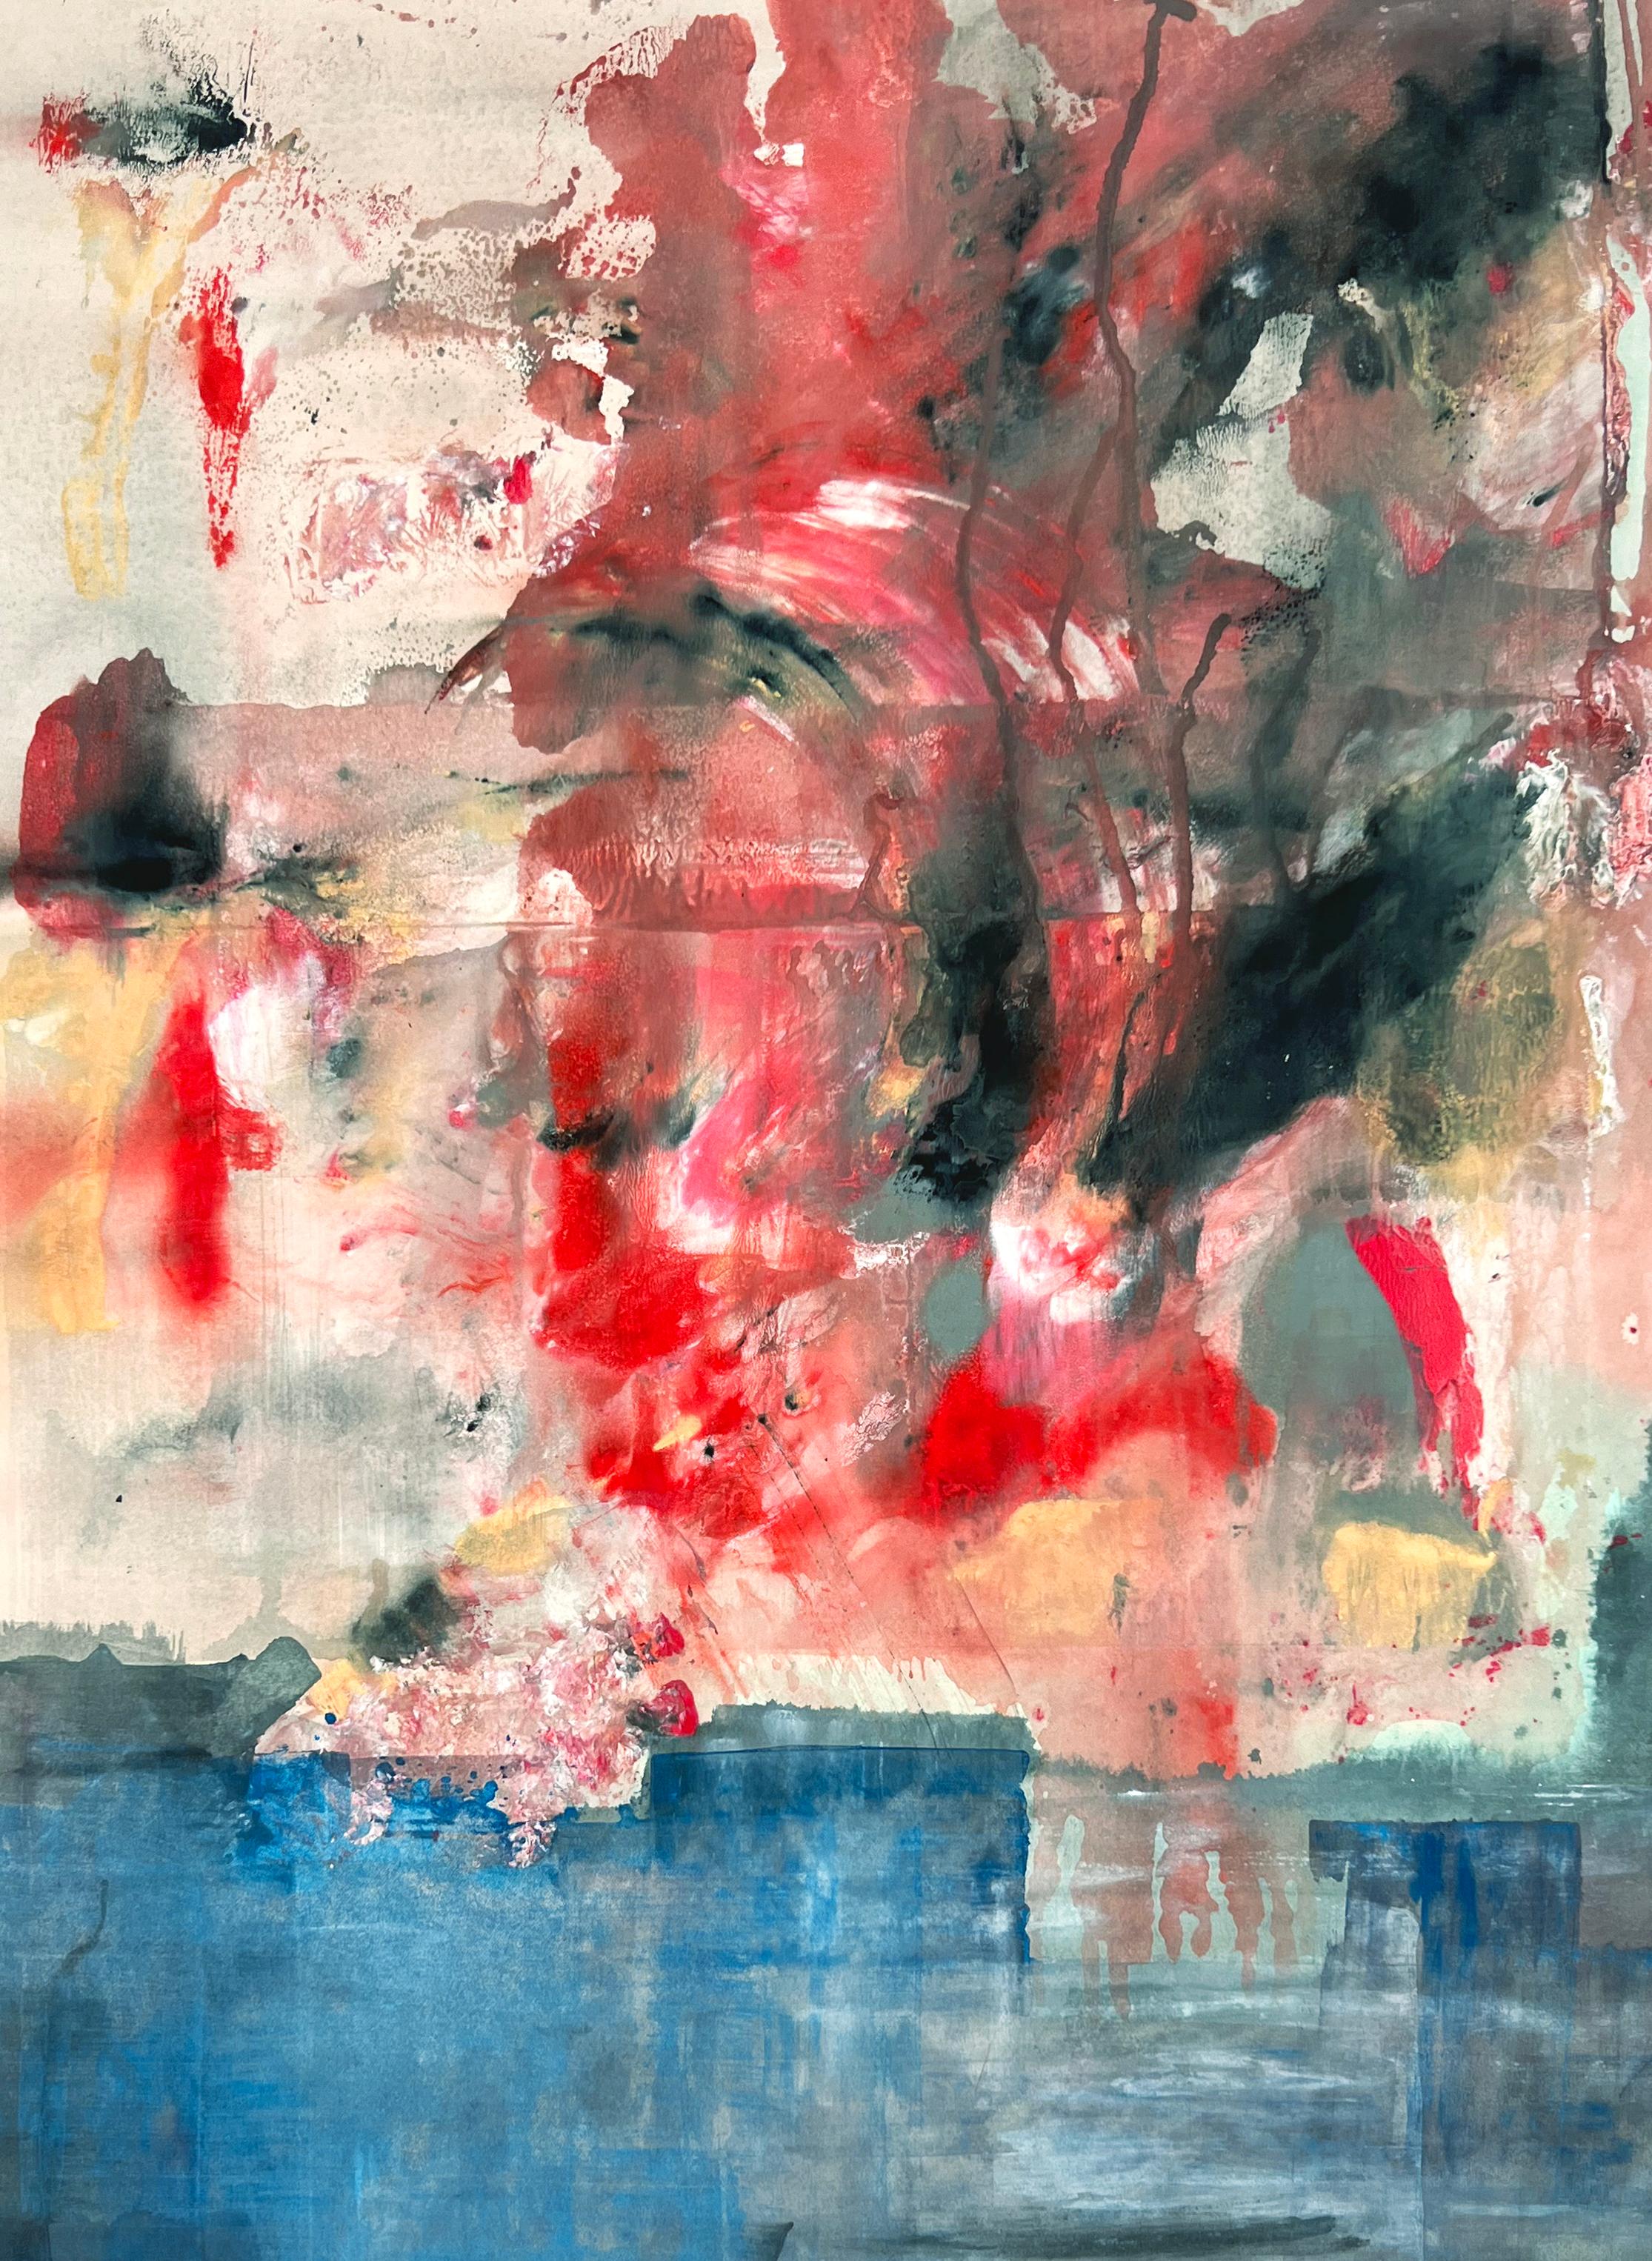  Bold Abstract and Figurative Composition in Blue and red Acrylic on Paper - Abstract Expressionist Art by Ricardo de Silva